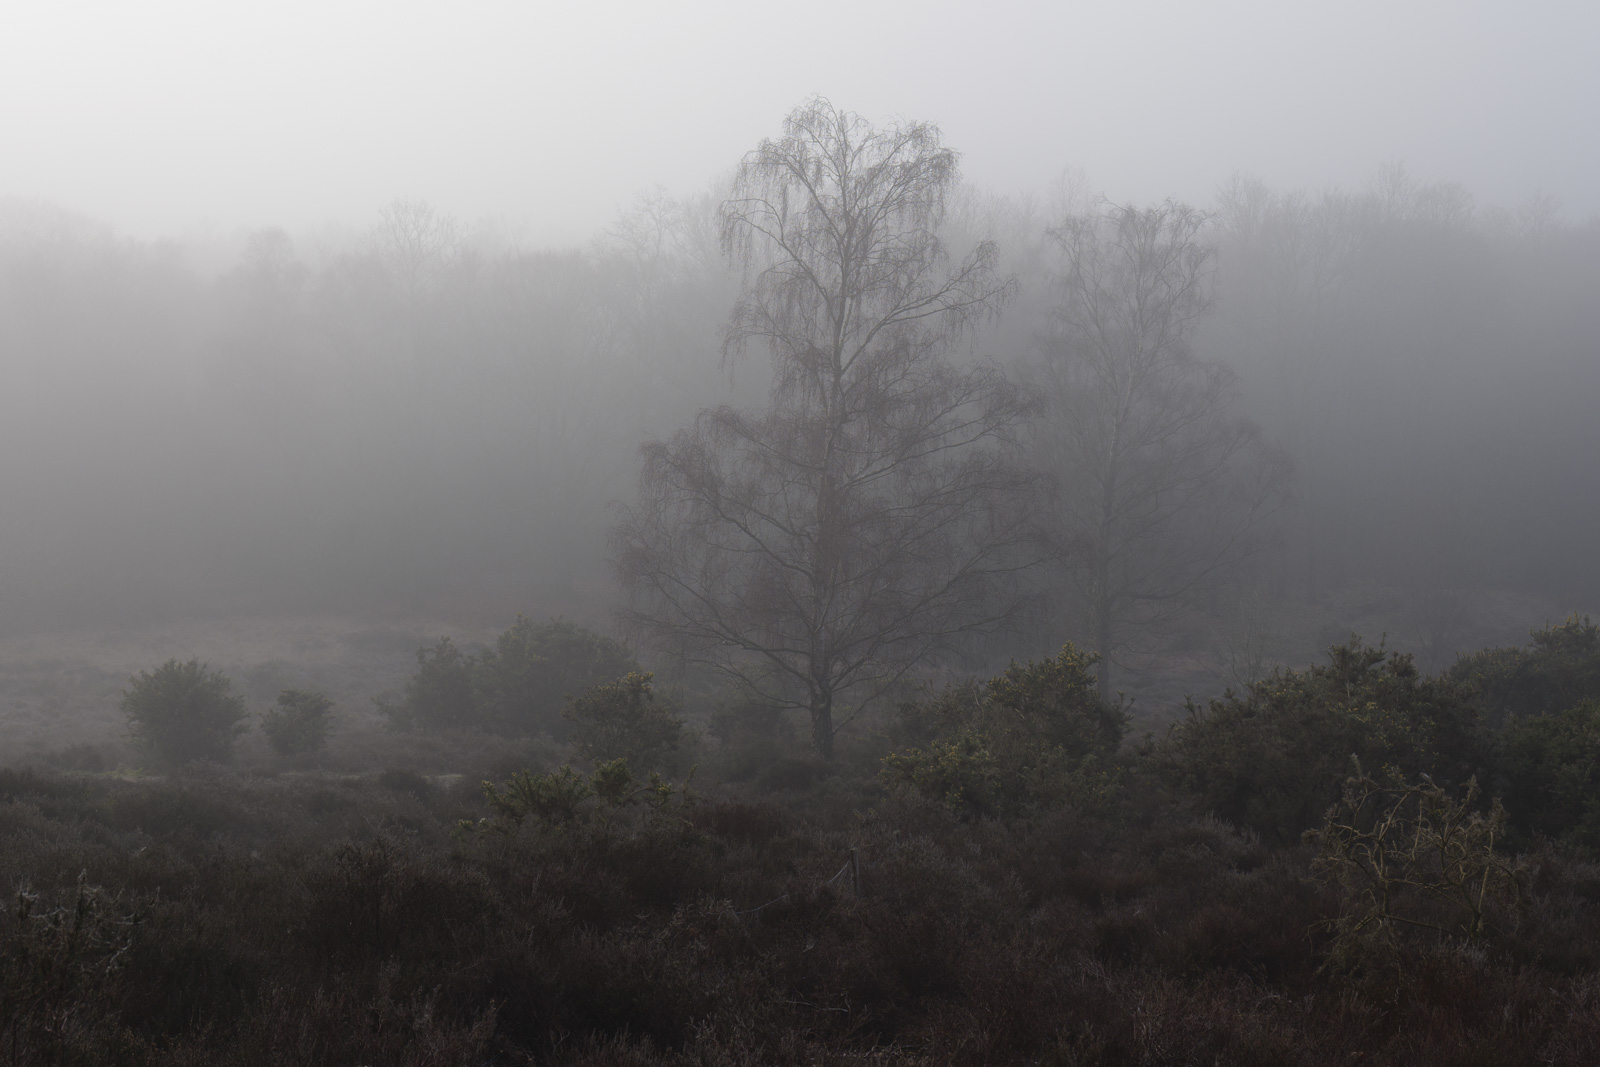 Picture taken with Panasonic S5 II of misty heathland clearing landscape